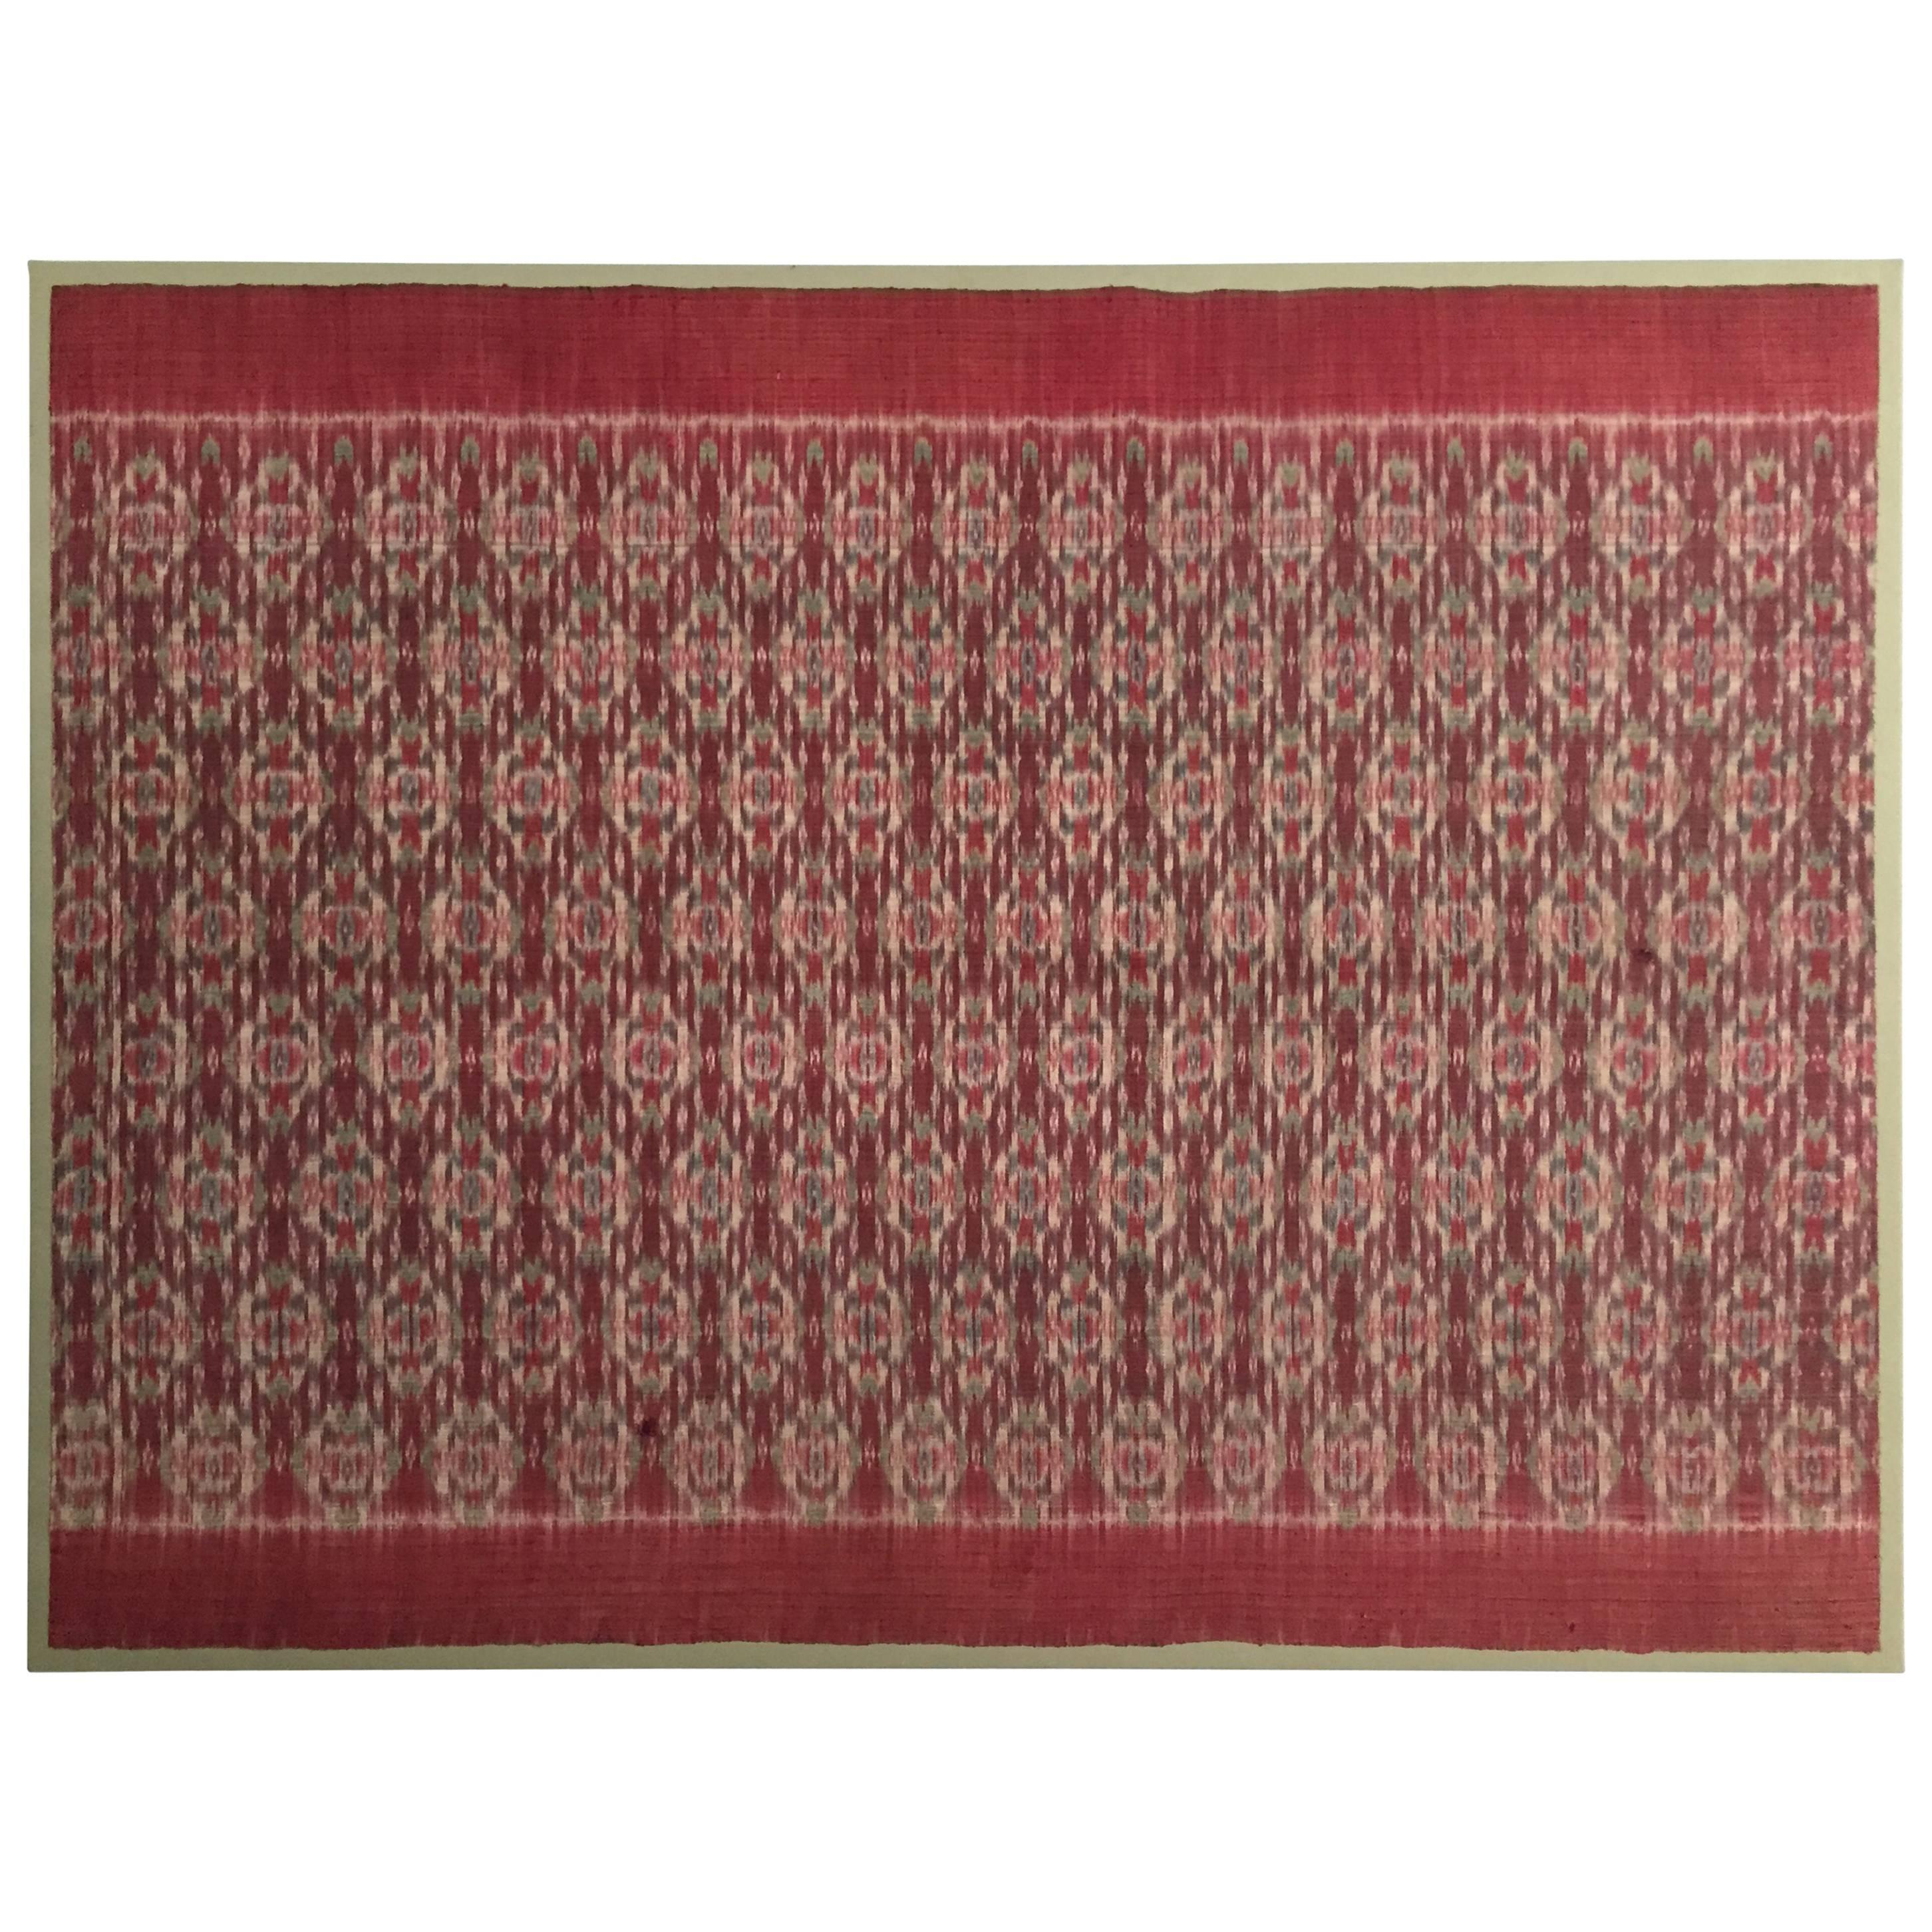 19th Century Indonesian Ikat Textile Fragment For Sale